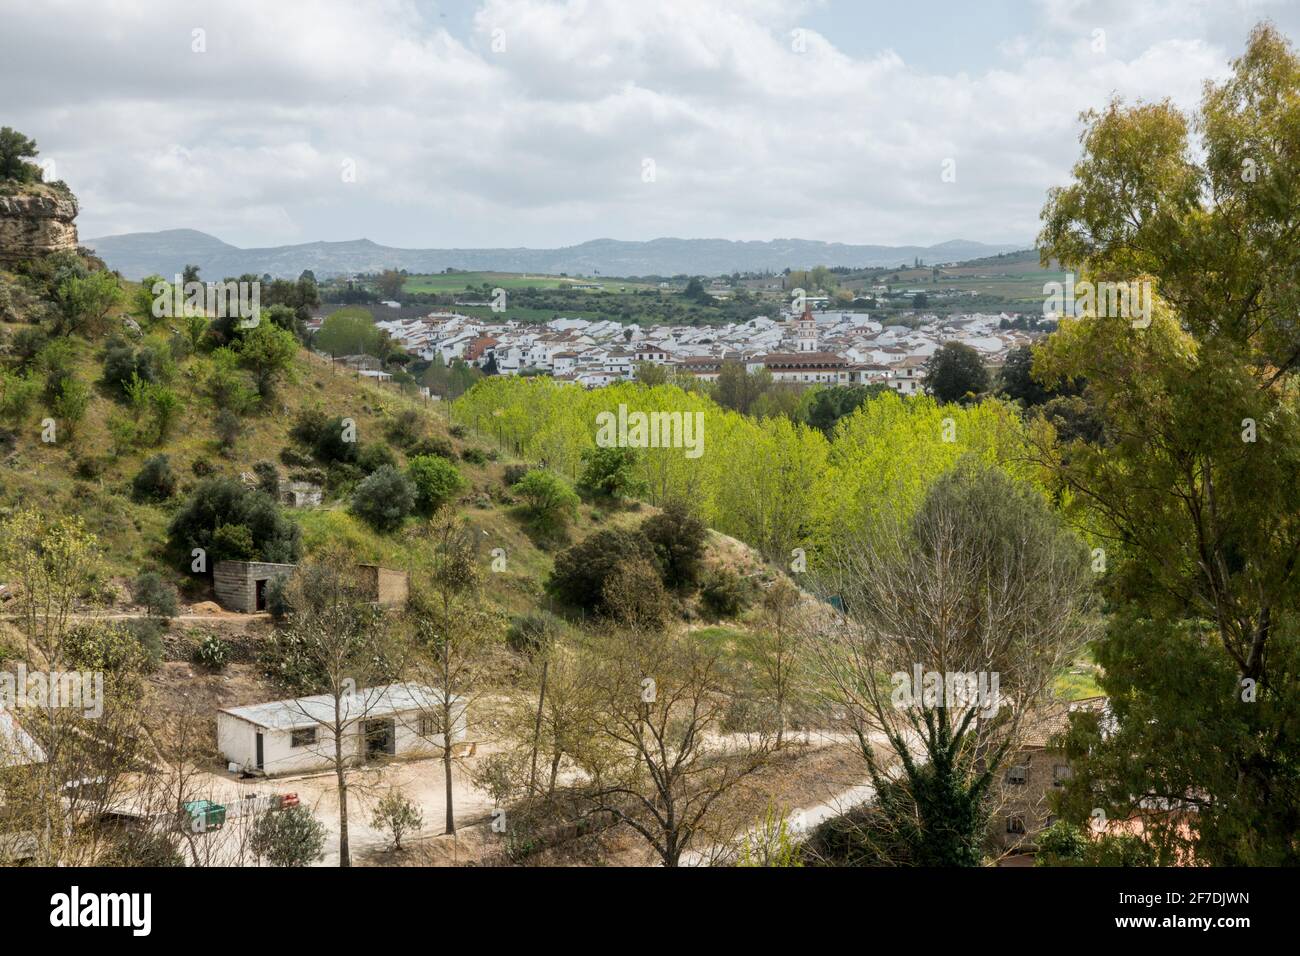 The Spanish town Arriate, in the Ronda area, Andalusia, Spain. Stock Photo